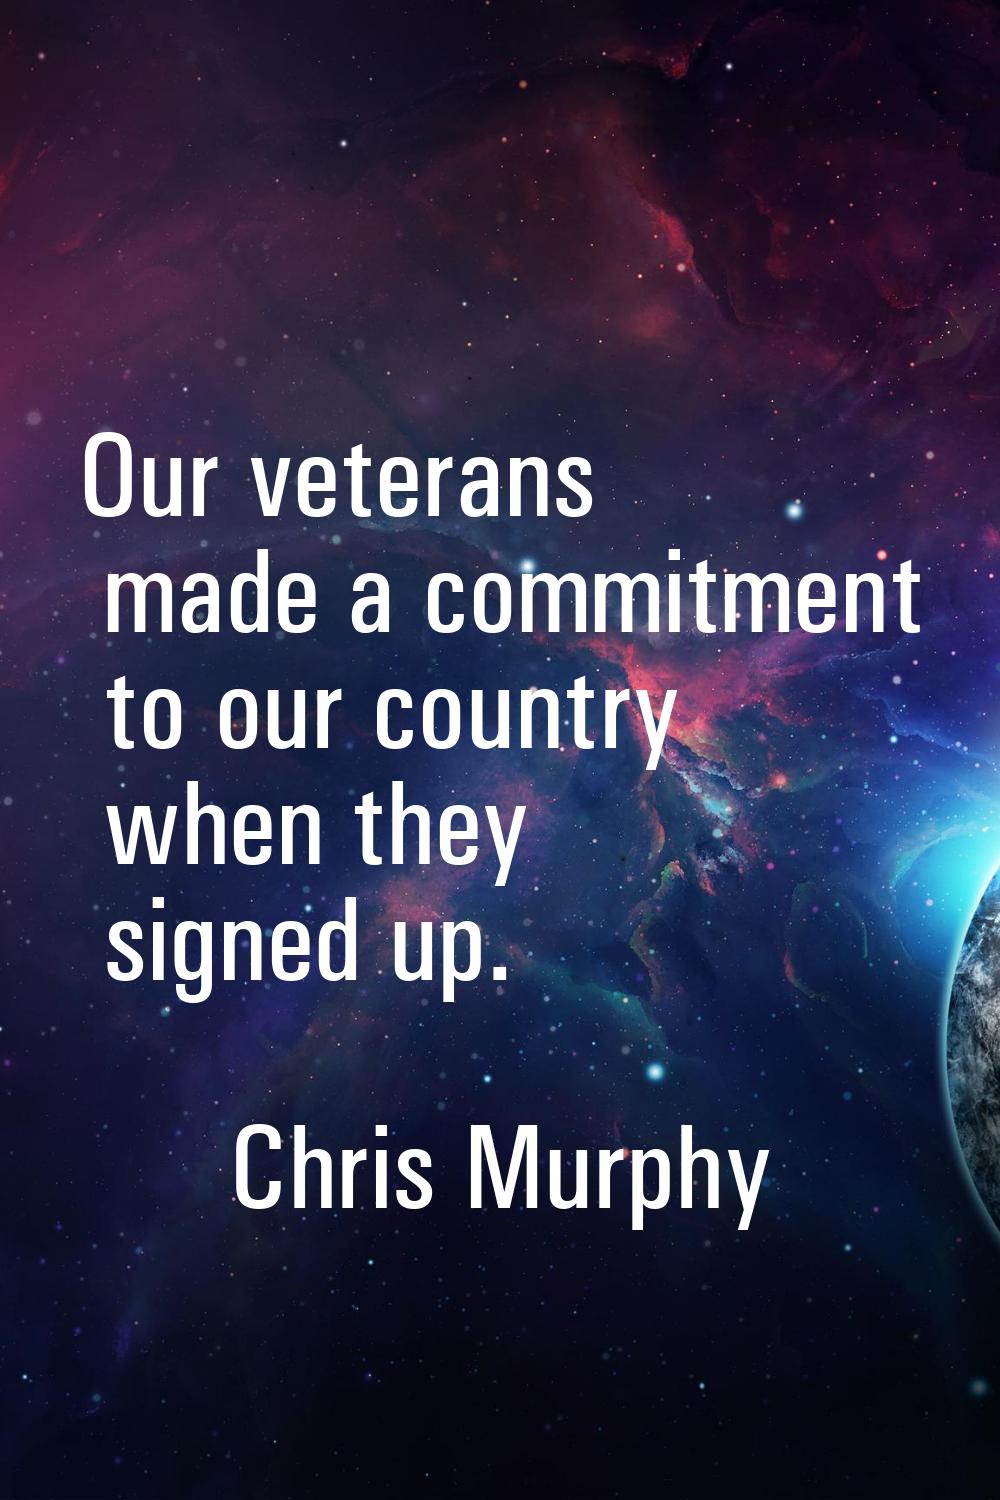 Our veterans made a commitment to our country when they signed up.